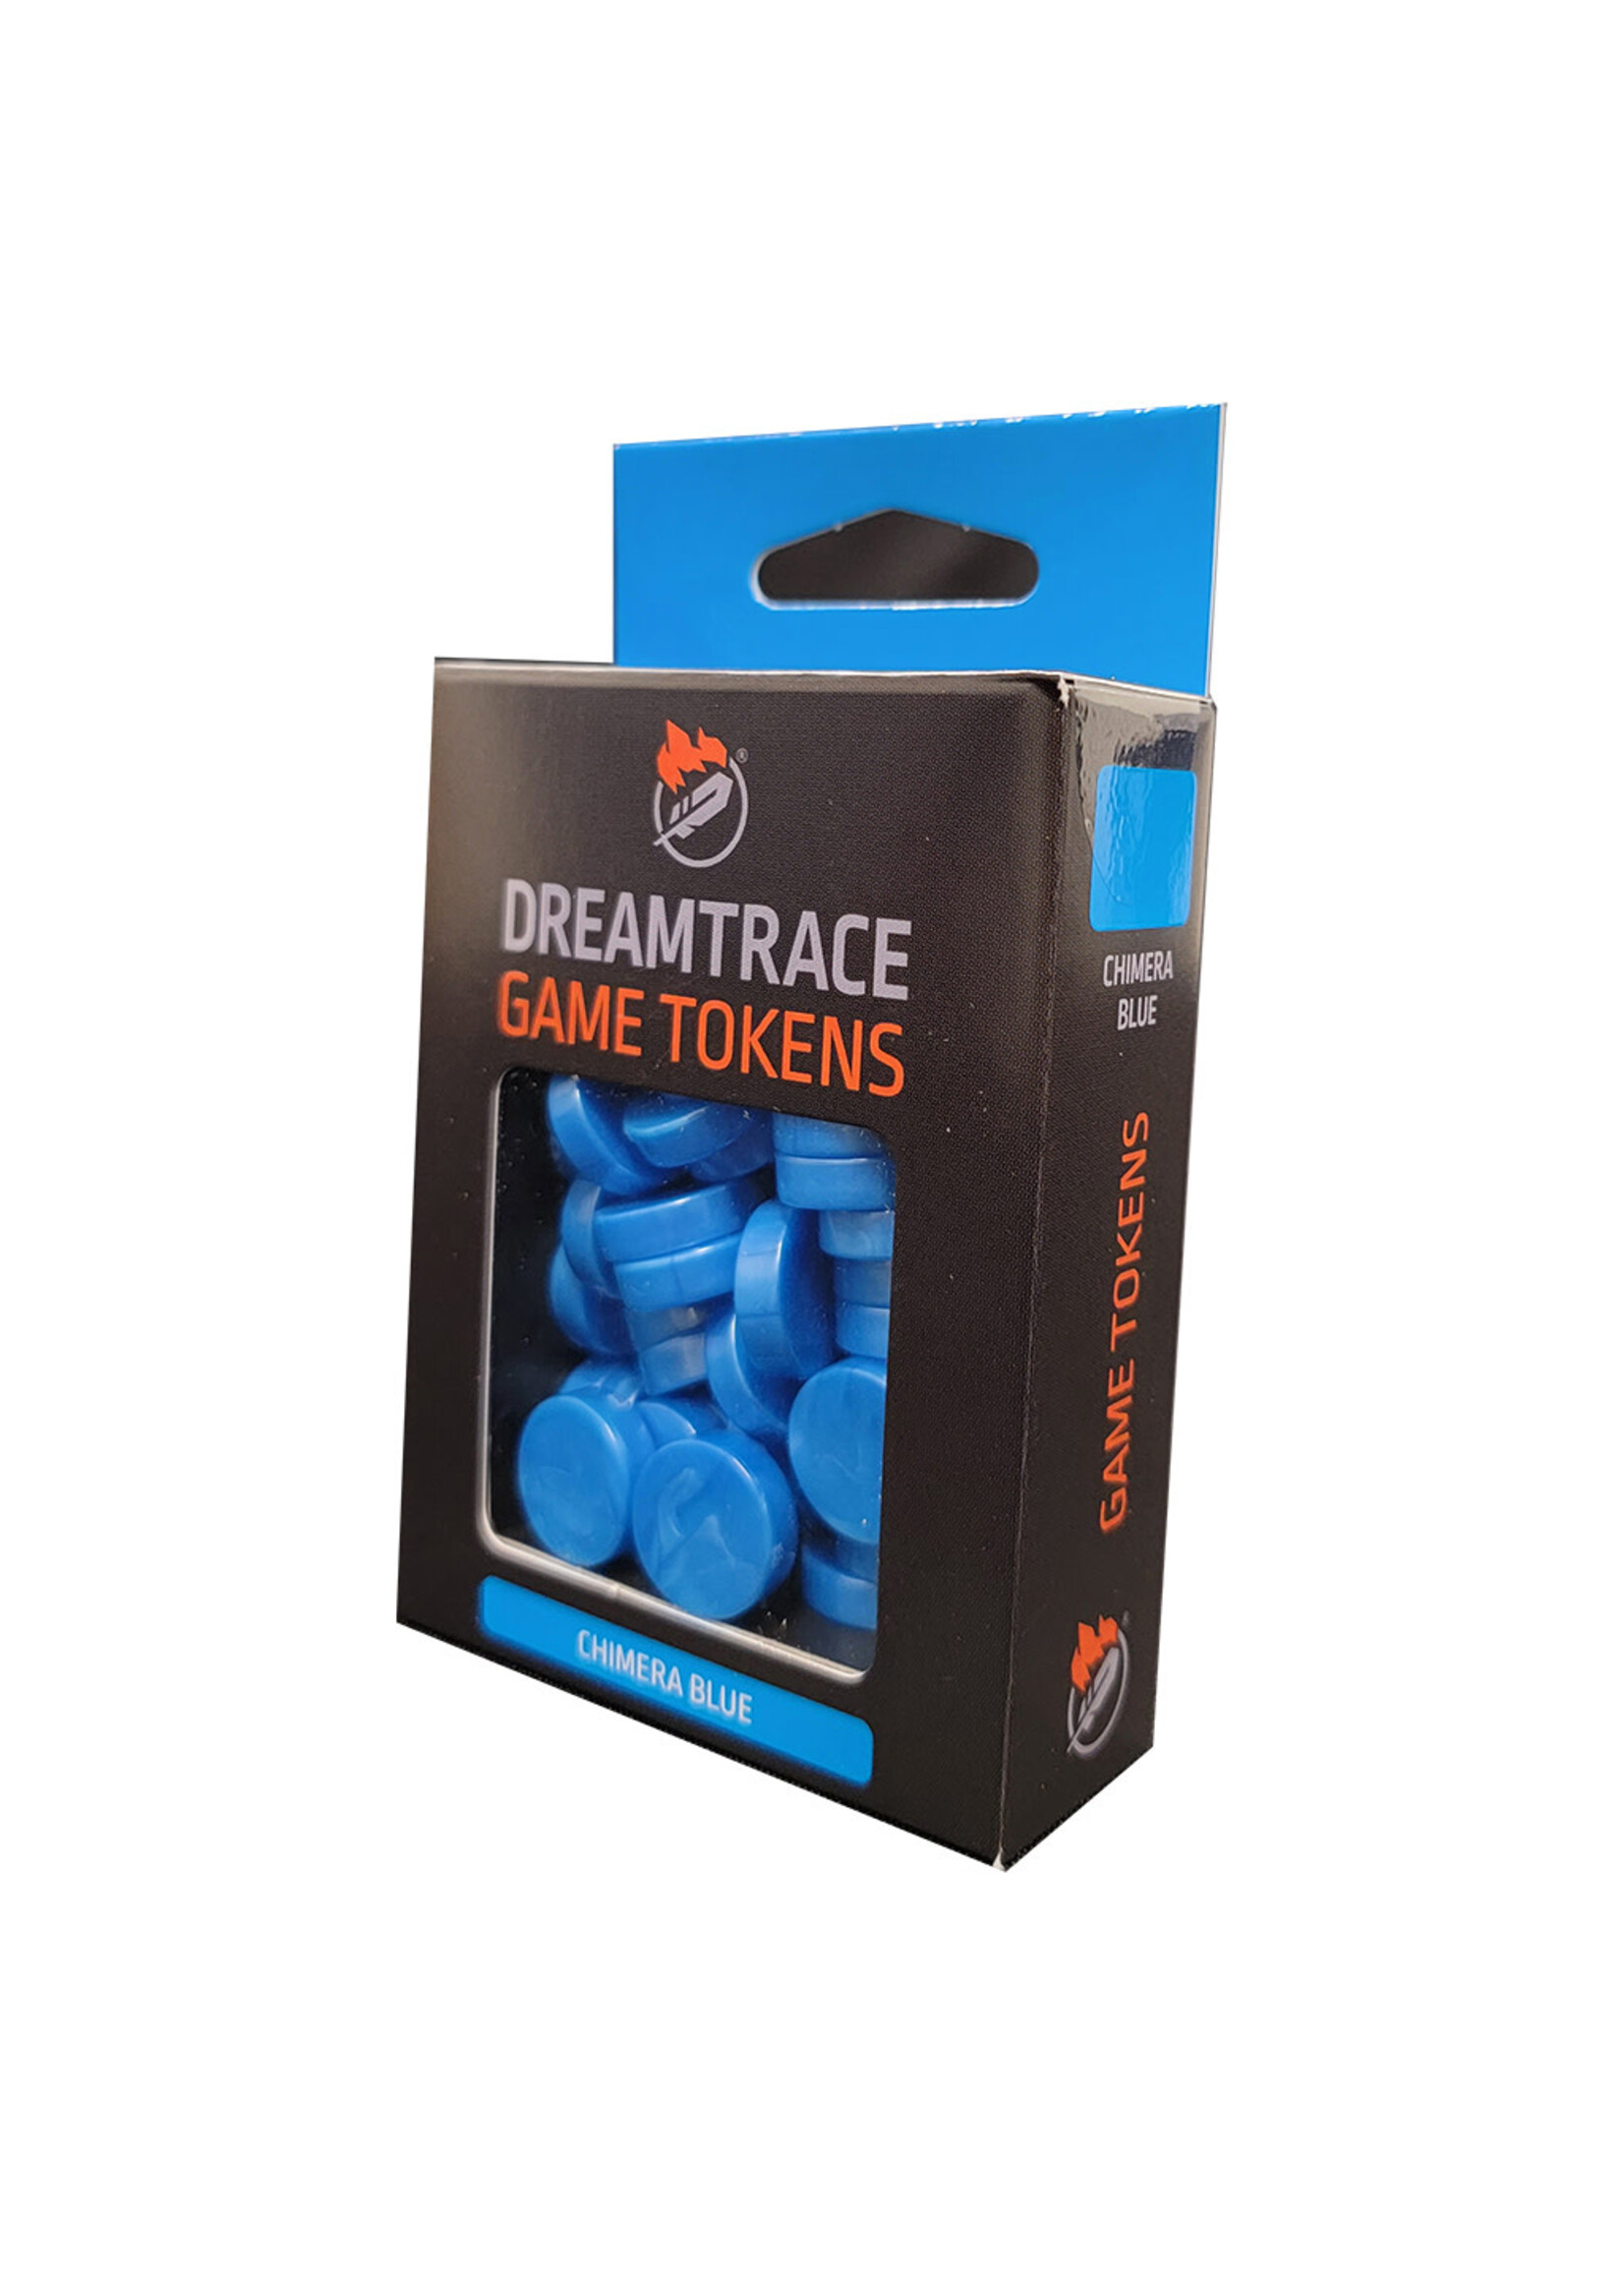 Ghost Galaxy DreamTrace Gaming Tokens: Chimera Blue